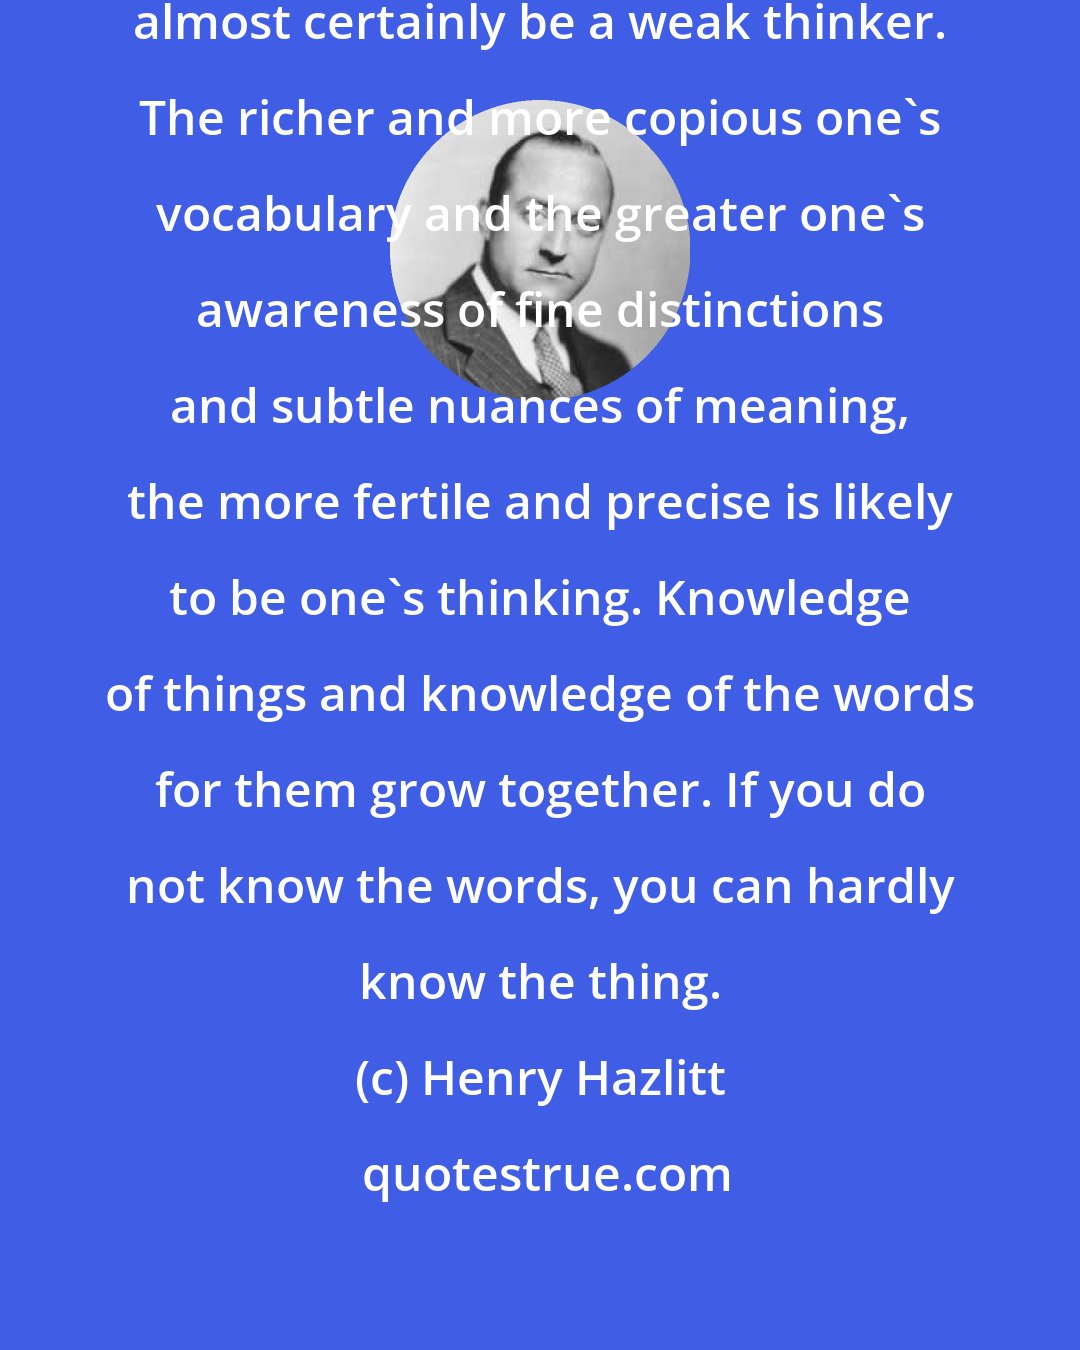 Henry Hazlitt: A man with a scant vocabulary will almost certainly be a weak thinker. The richer and more copious one's vocabulary and the greater one's awareness of fine distinctions and subtle nuances of meaning, the more fertile and precise is likely to be one's thinking. Knowledge of things and knowledge of the words for them grow together. If you do not know the words, you can hardly know the thing.